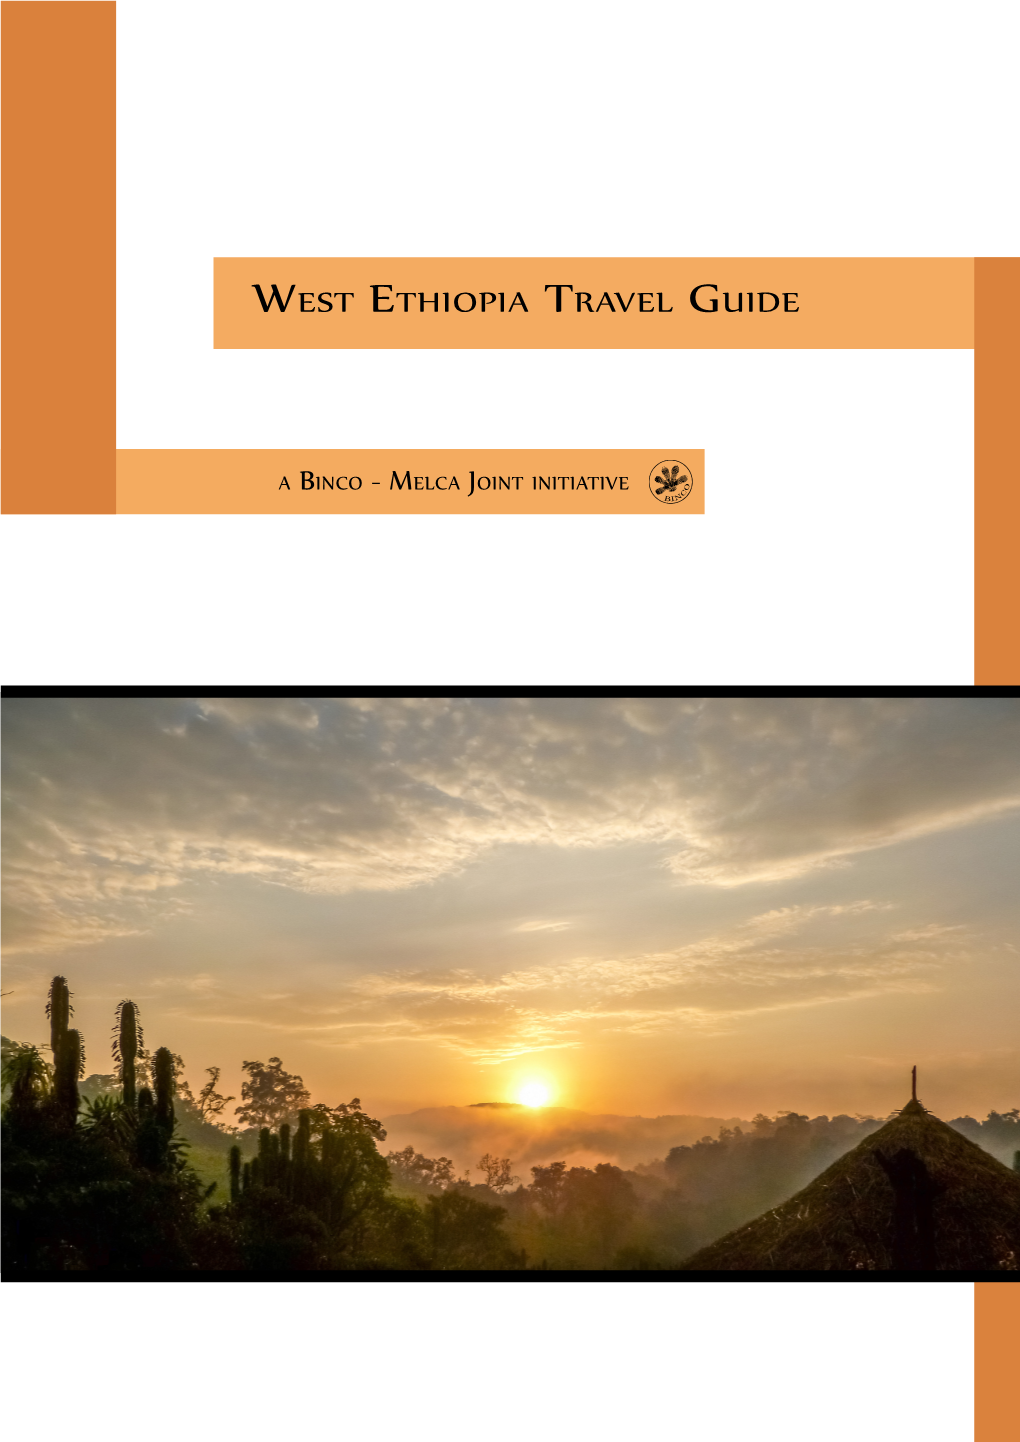 Travel Guide for West Ethiopia